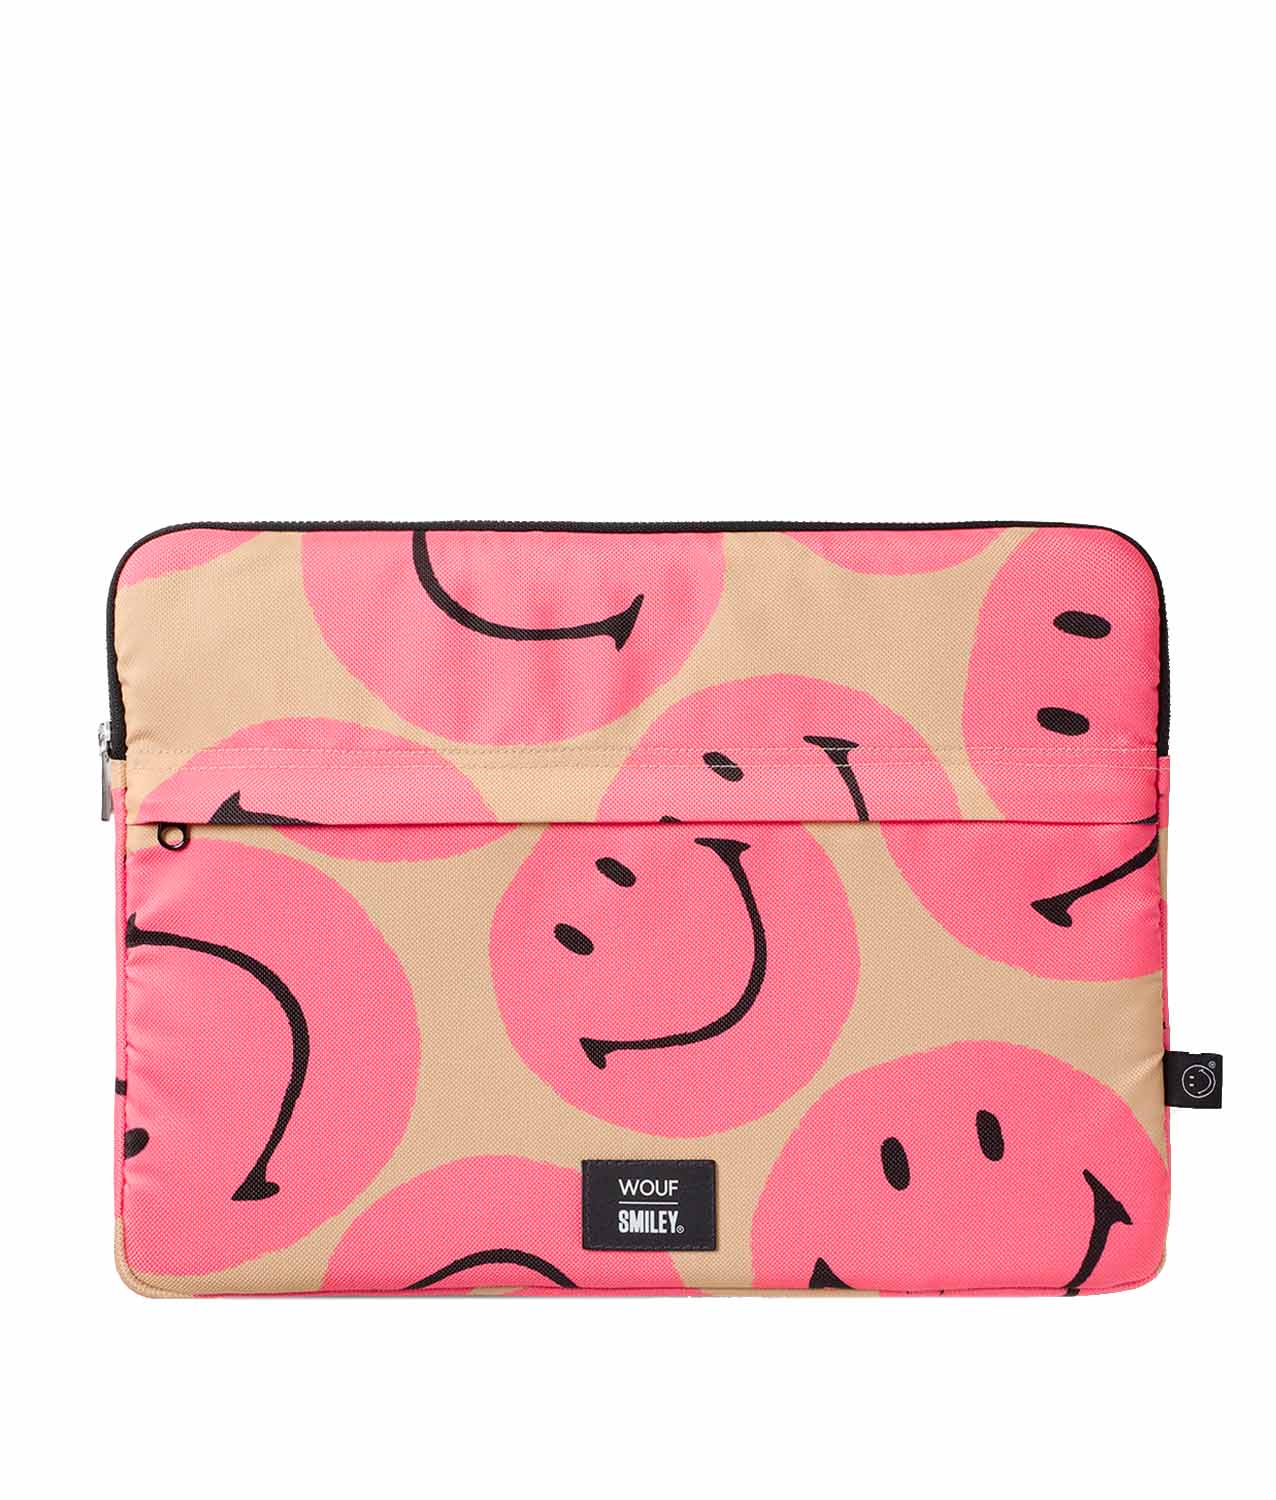 wouf-pink-smiley-13-14inch-laptop-sleeve